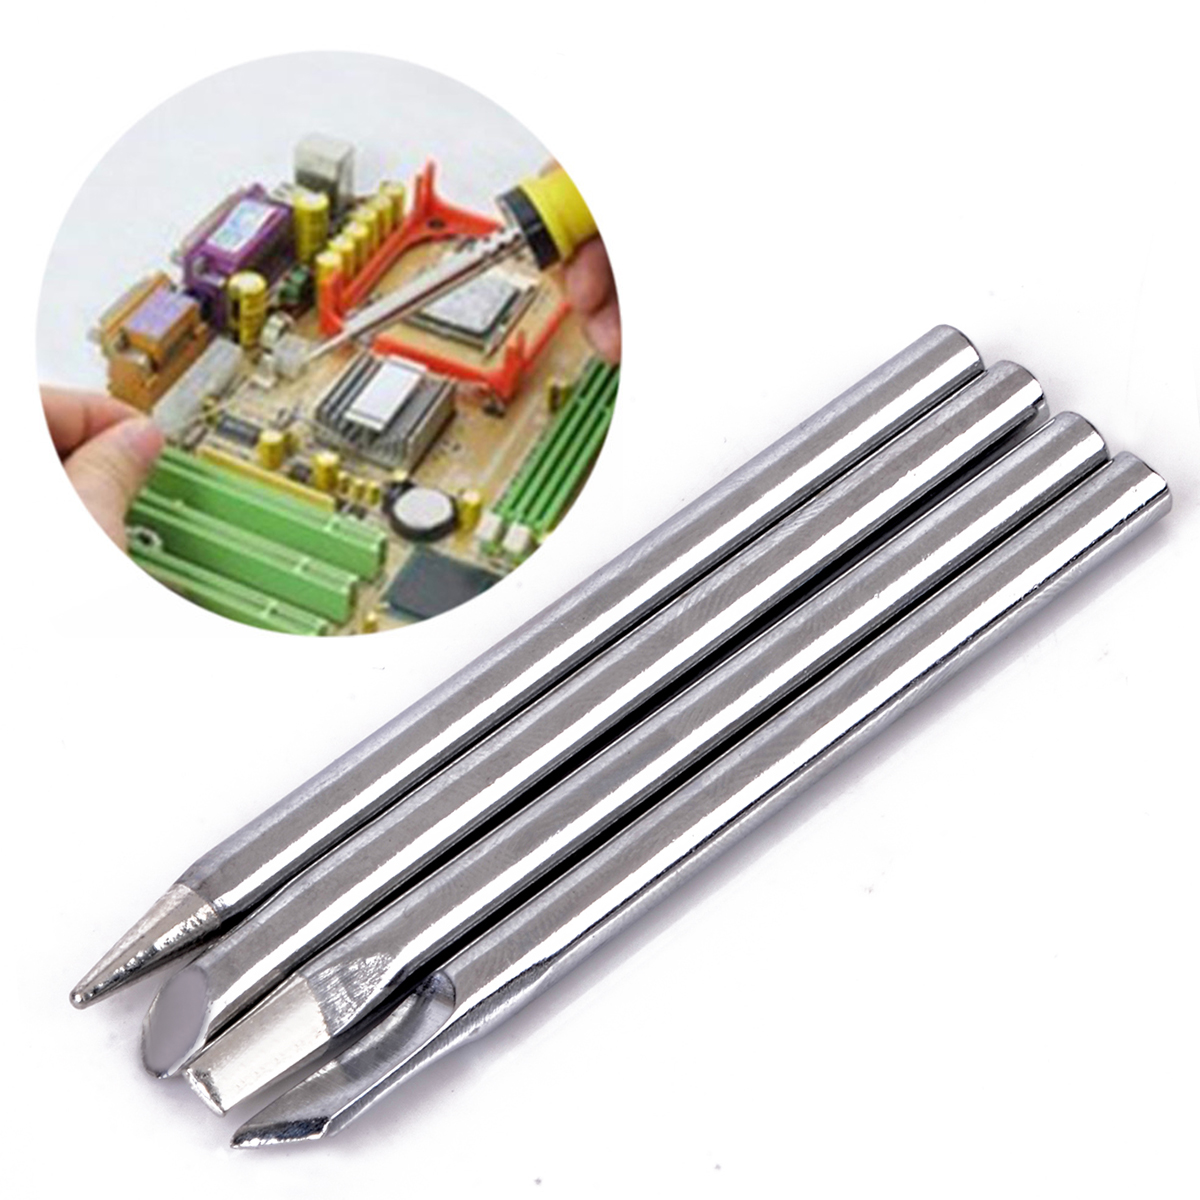 4pcs Silver Copper Soldering Tips Replaceable Soldering Iron Tips Head 4.4mm Diameter 65mm Length For 40W Solder Irons